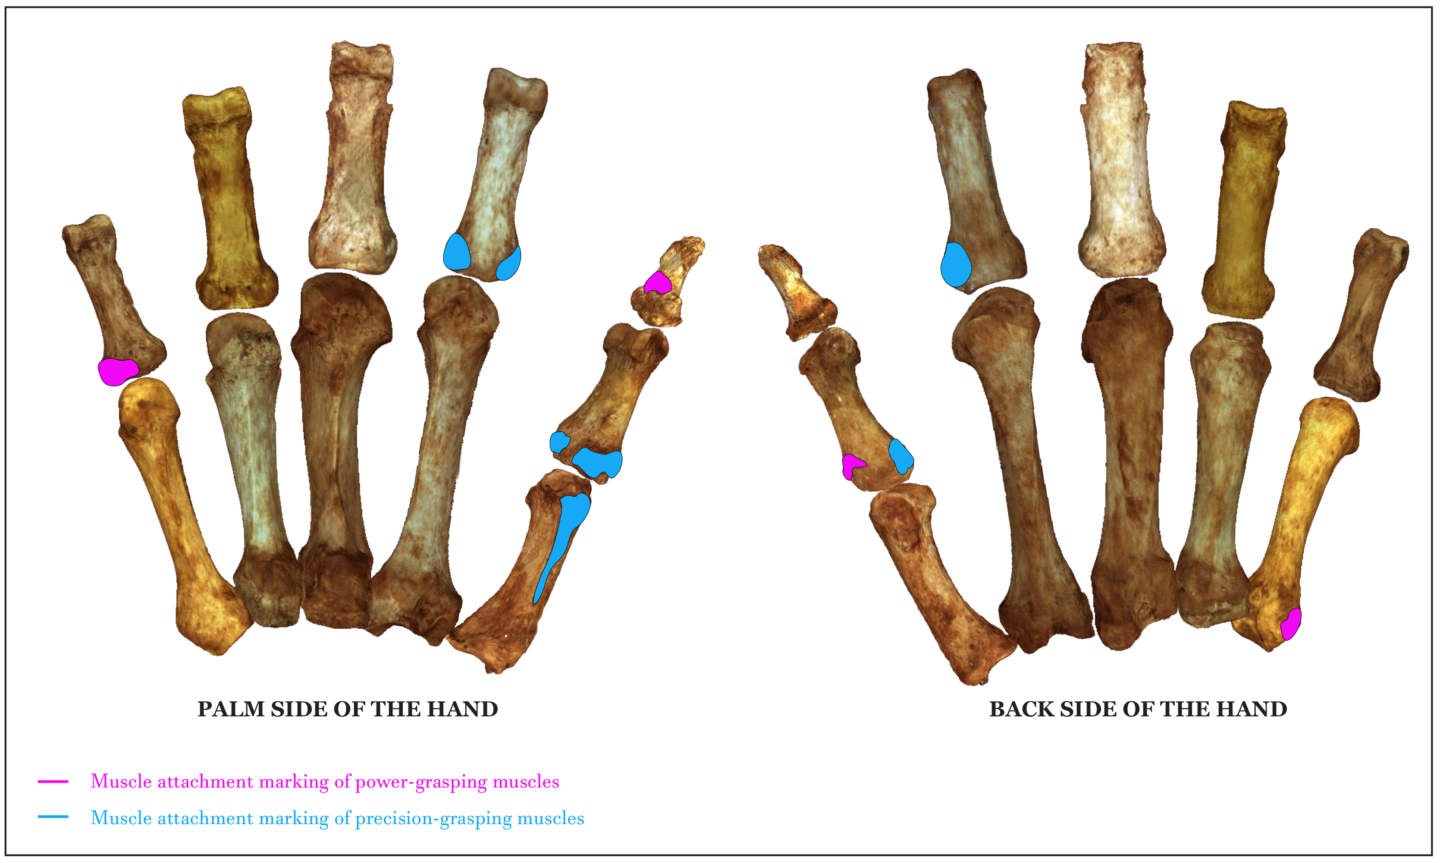 Muscle attachment sites on hand bones